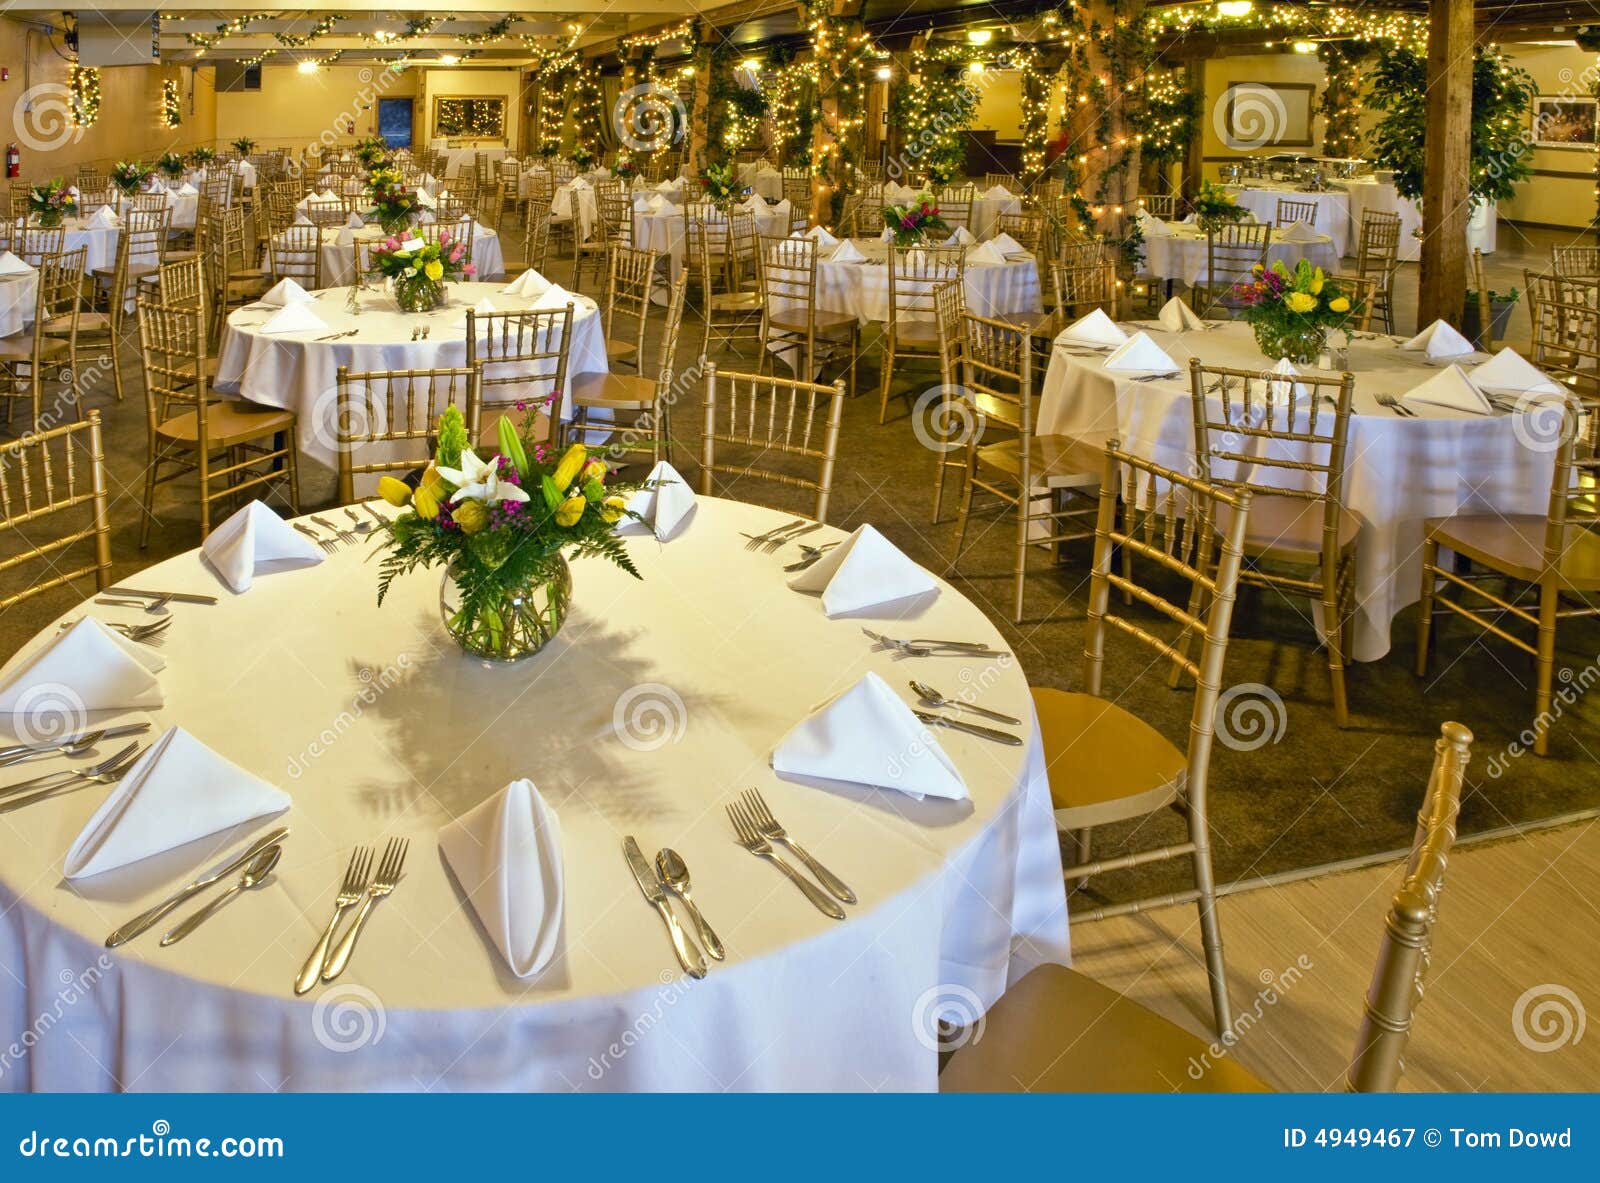  Wedding party room stock image Image of dining colour 